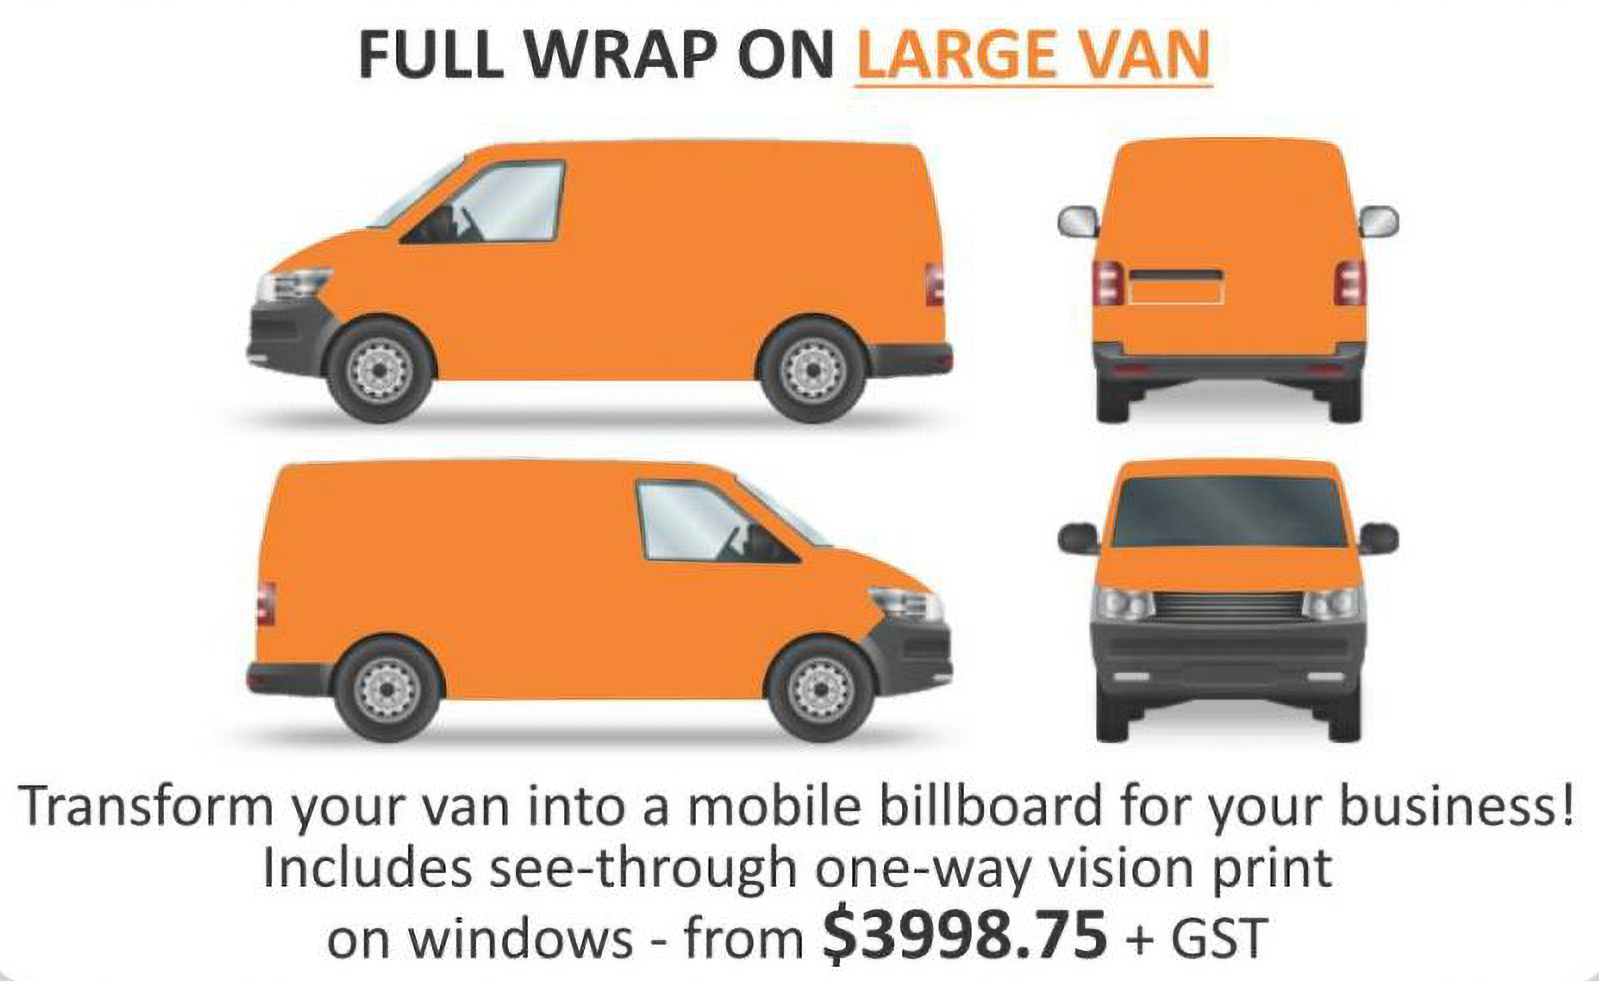 Full wrap vehicle signage pricing for large van in Newcastle